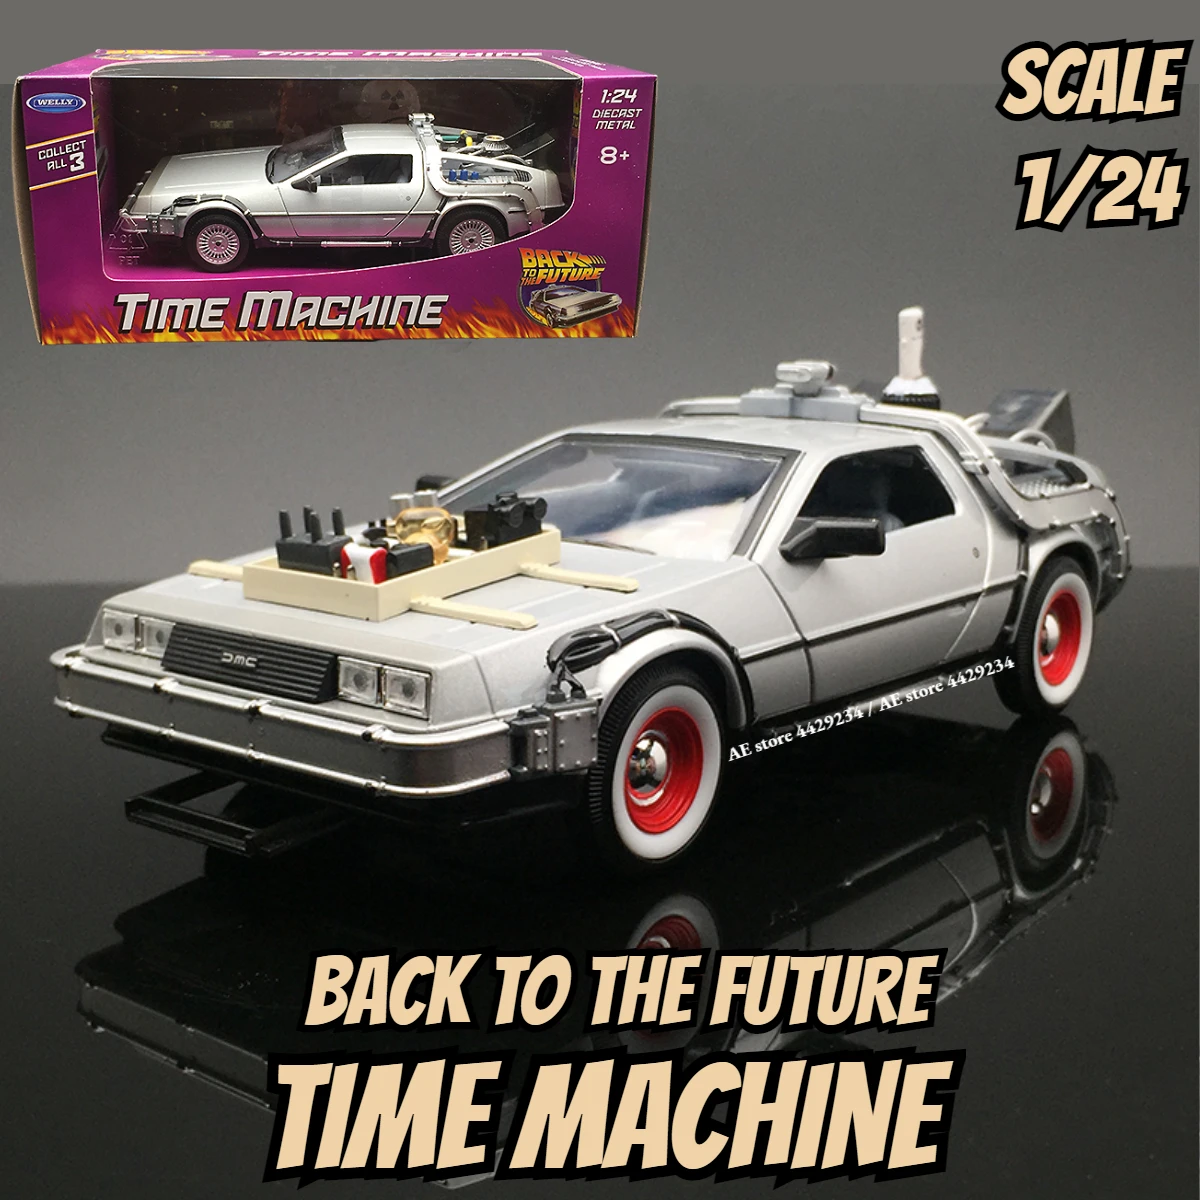 

WELLY 1:24 Time Machine Delorean DMC-12 Car Model Repilca Back to the Future 3 Movie Metal Diecast Kid Toy Miniature for Boy